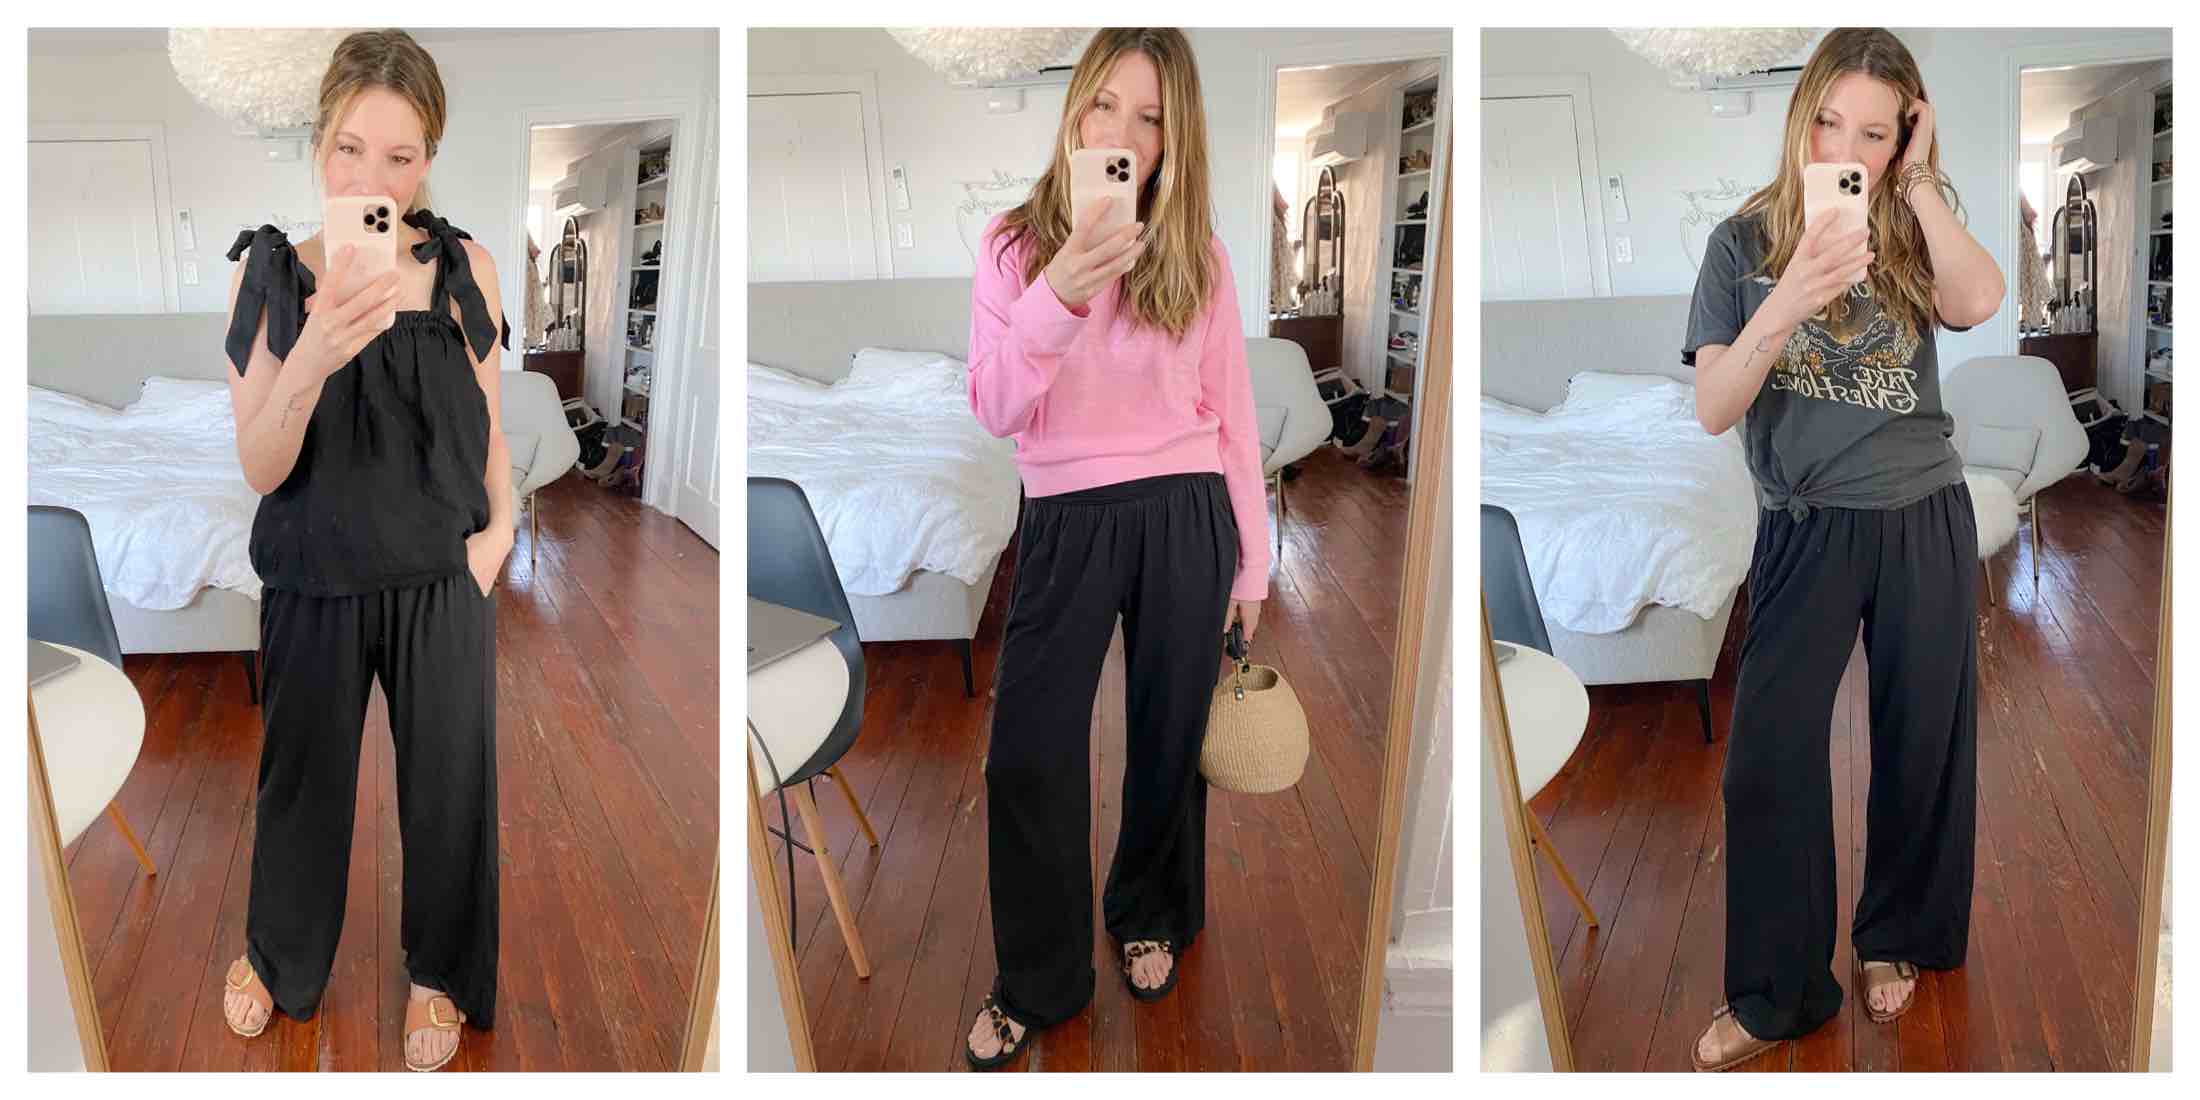 Wide leg sweatpants outfit  Wide leg sweatpants outfit, Effortlessly chic  outfits, Aesthetic clothes